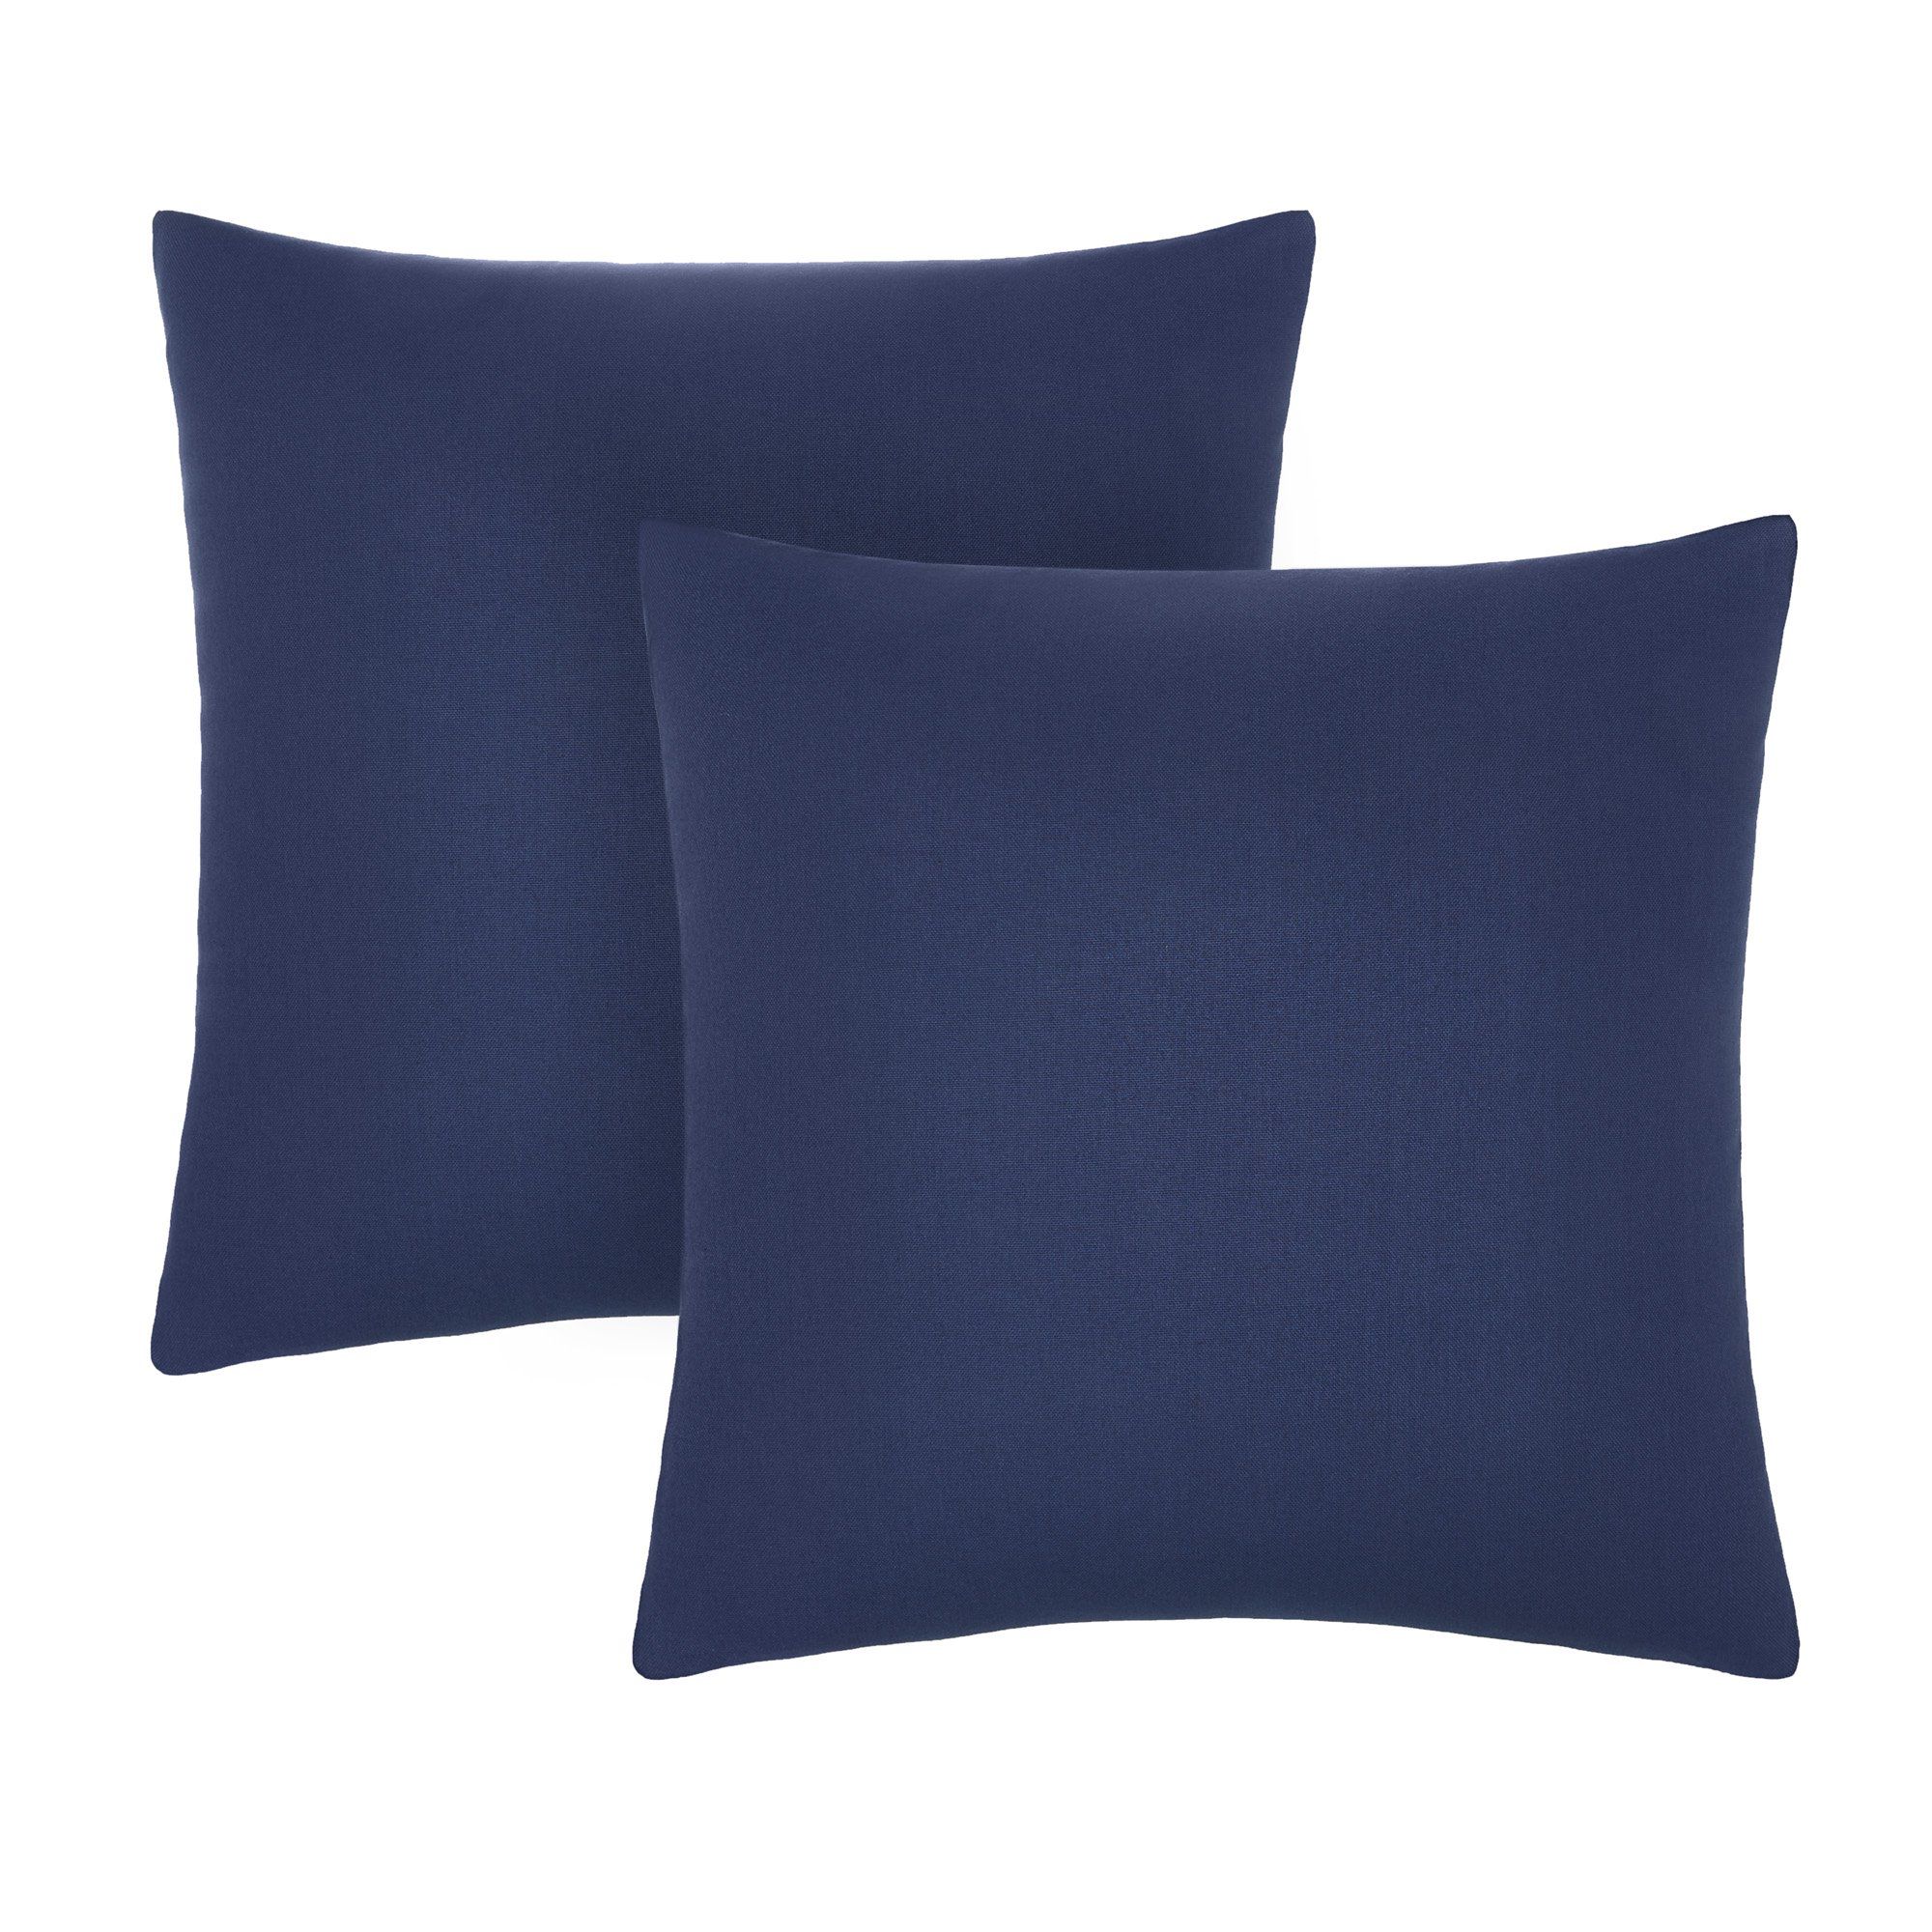 Gap Home Core Solid 2 Pack Decorative Square Throw Pillows Navy 18" x 18" | Walmart (US)